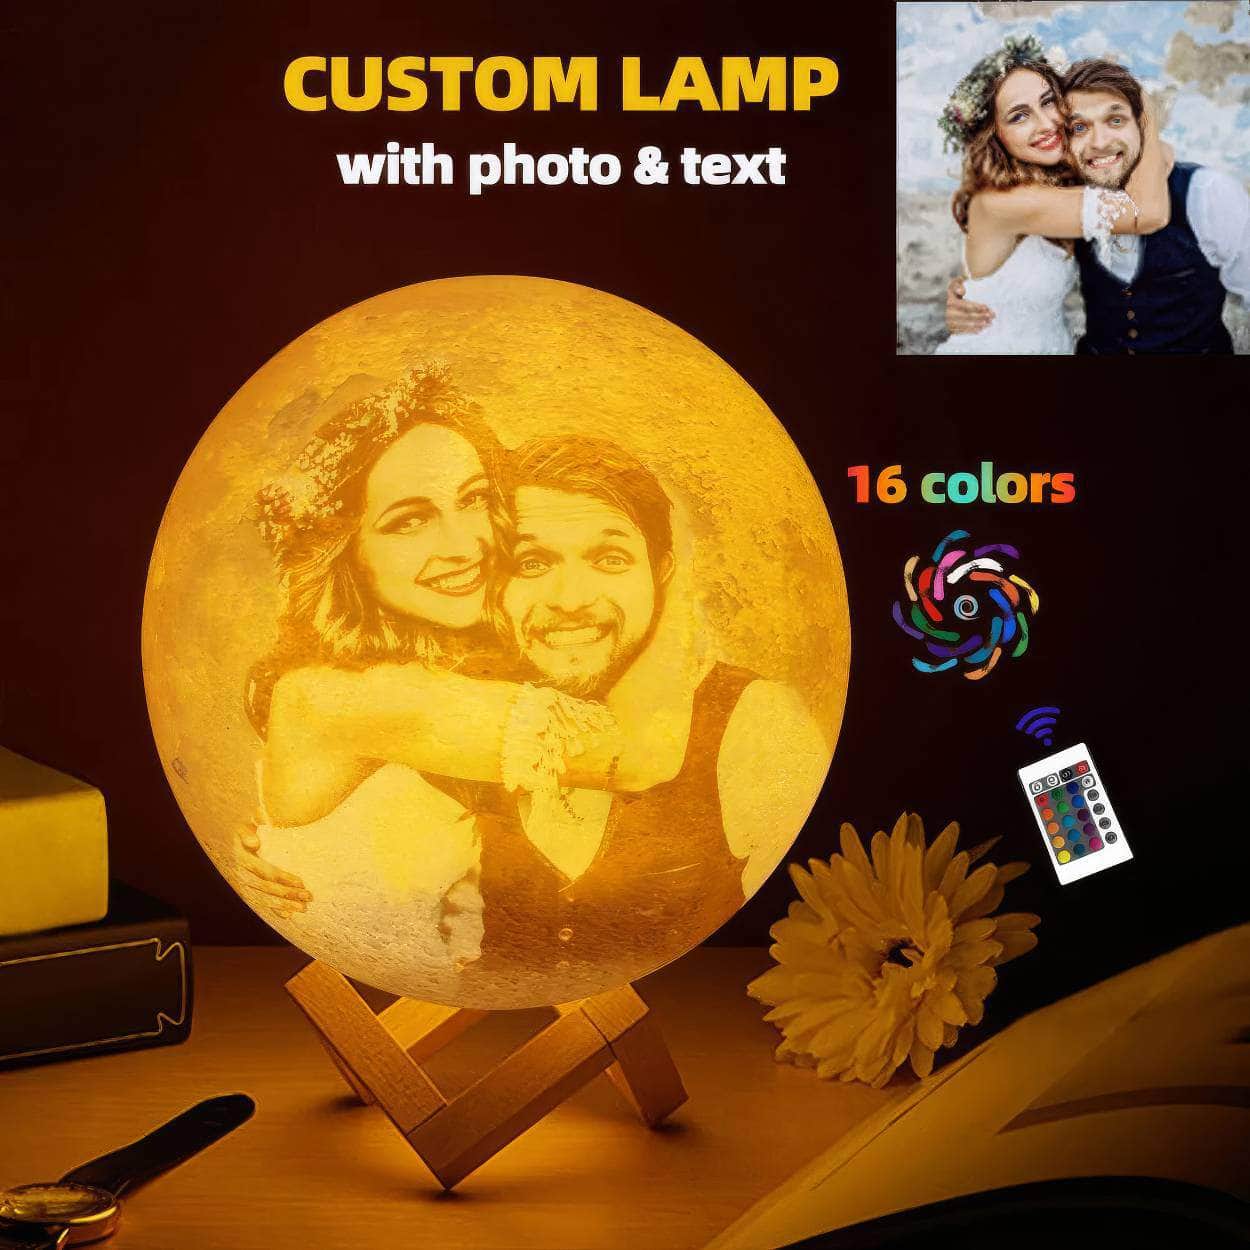 Customized 3D Printing Moon Lamp - Personalized with Photo and Text, USB Rechargeable Night Light, Ideal for Birthday, Mother's Day, Lunar Christmas Gift